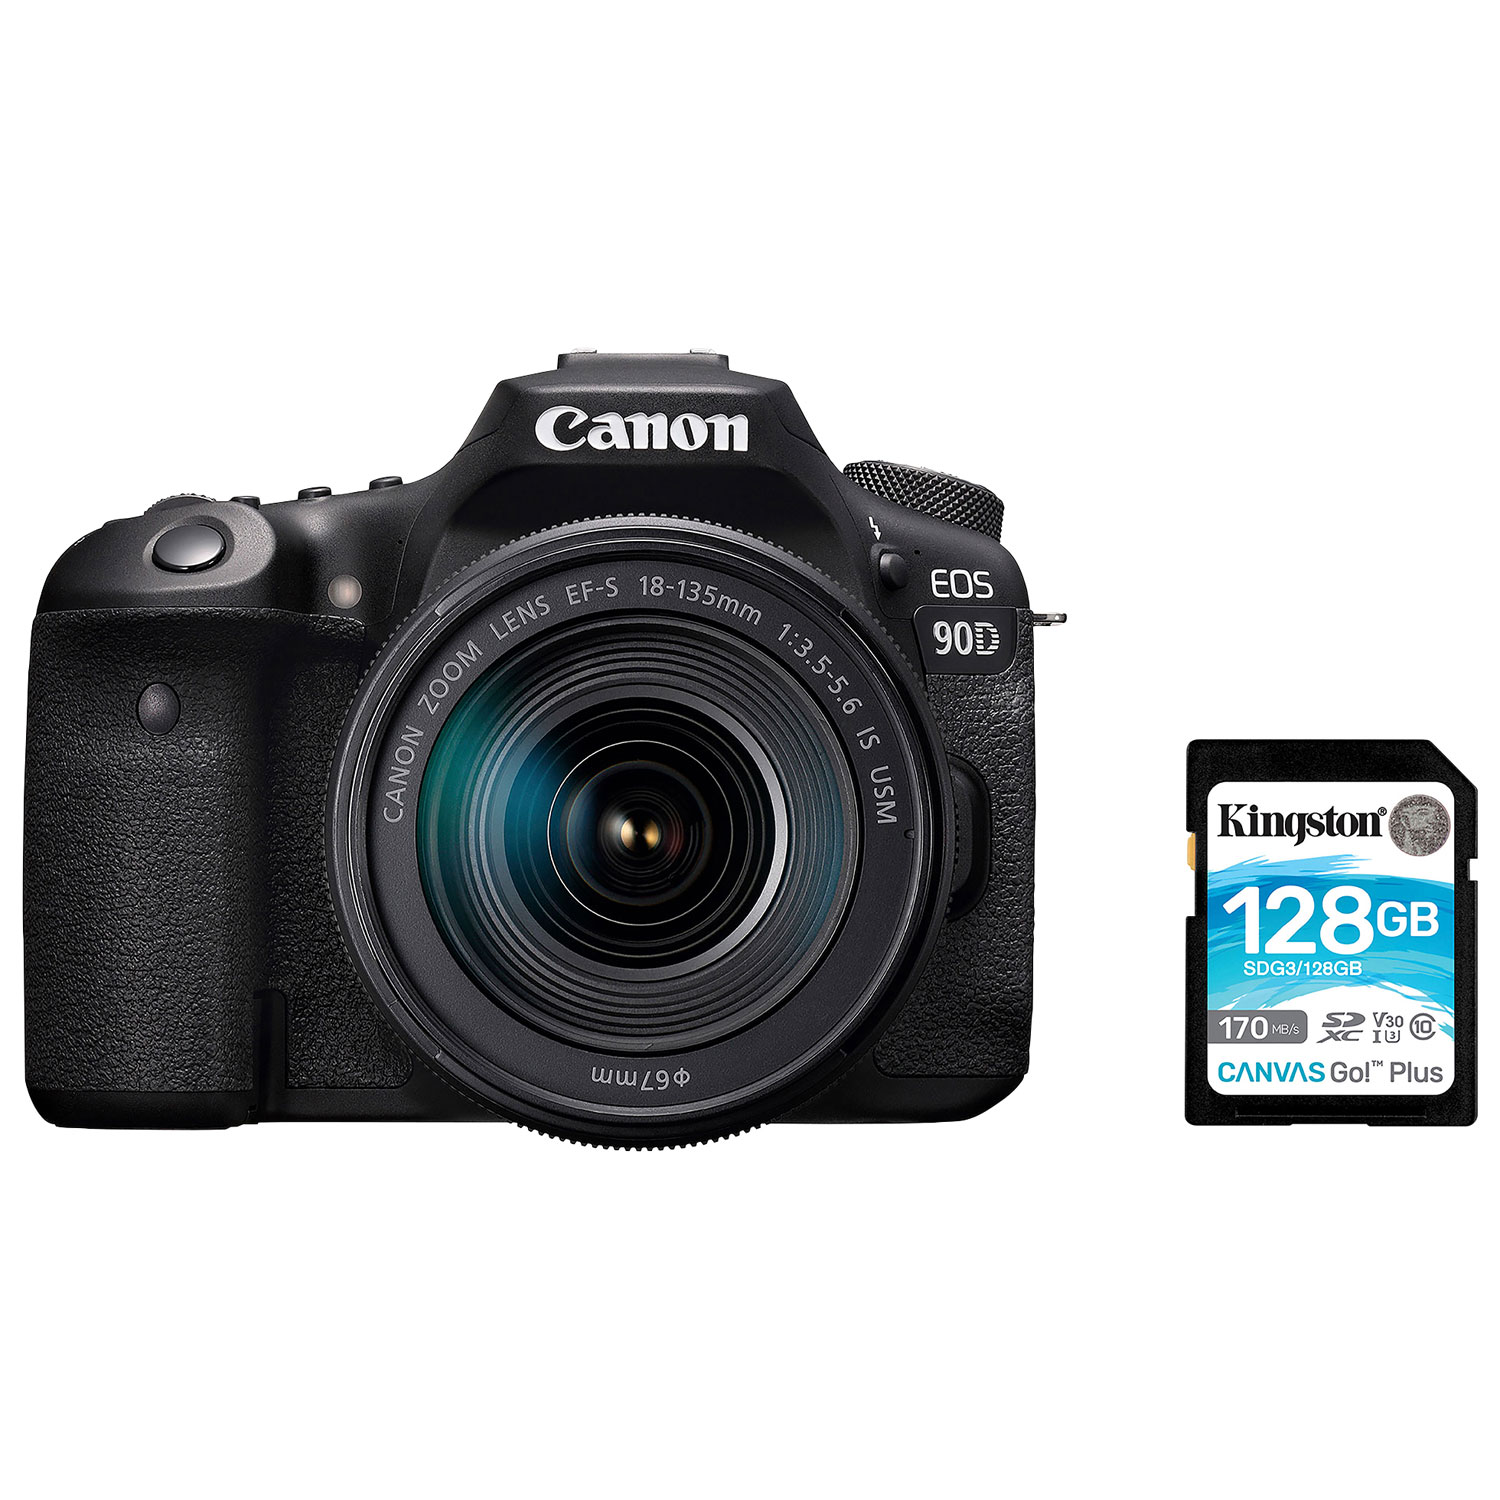 Canon EOS 90D DSLR Camera with 18-135mm IS USM Lens Kit & 128GB Memory Card